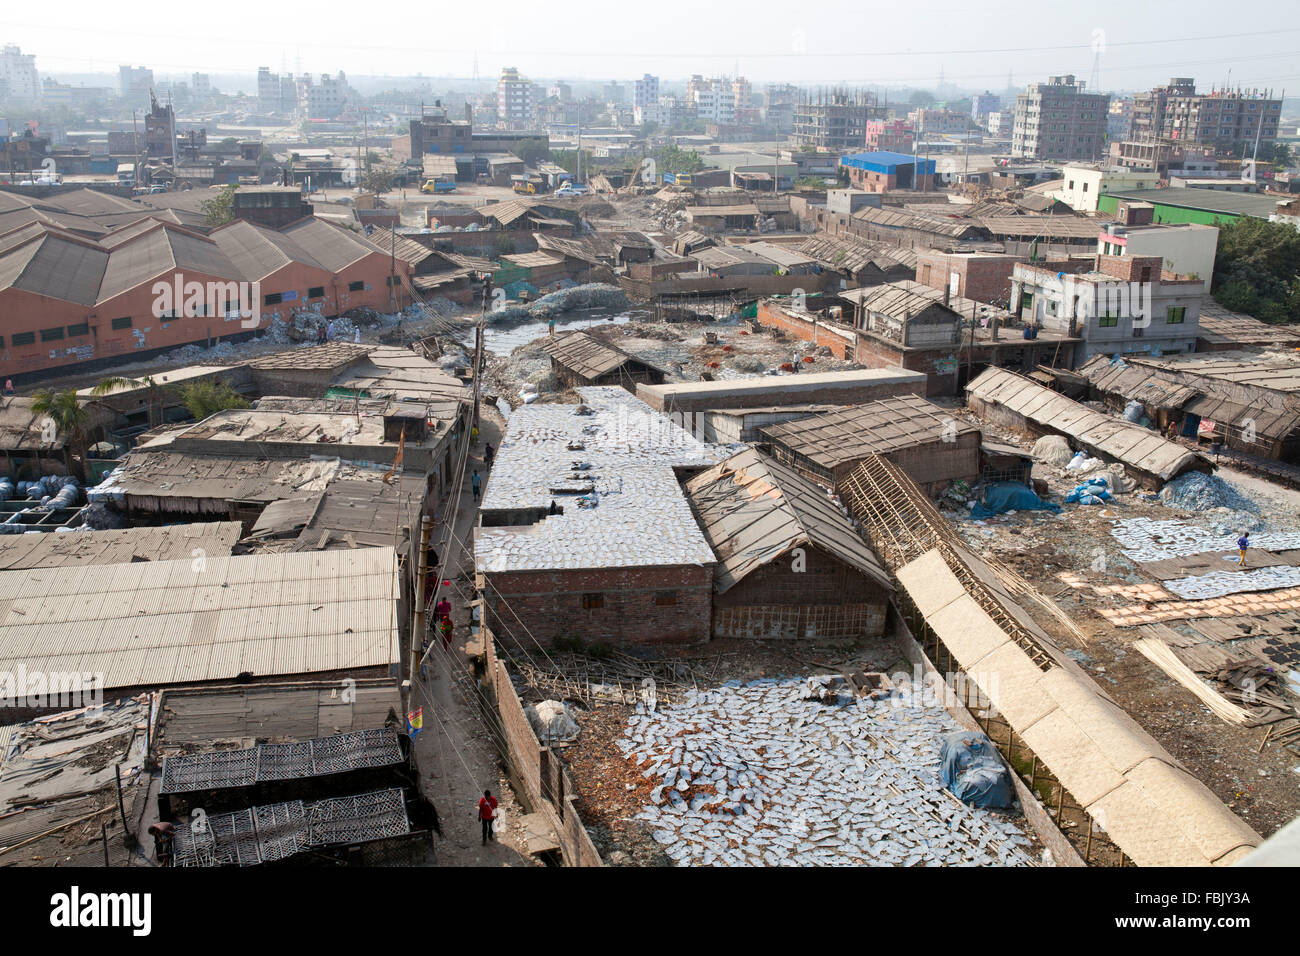 DHAKA, BANGLADESH 11th January 2016: Areal shot of Hazaribagh Tannery in Dhaka on January 11, 2016.  Industries Minister Amir Hossain Amu has ordered tannery owners to move their establishments within 72 hours from Hazaribagh to the Leather Industrial City at Savar on the outskirts of Dhaka.  Dhaka's Hazaribagh area, widely known for its tannery industry, has been listed as one of the top 10 polluted places on earth with 270 registered tanneries in Bangladesh, and around 90-95 percent are located at Hazaribagh employing 8,000 to 12,000 people. Stock Photo